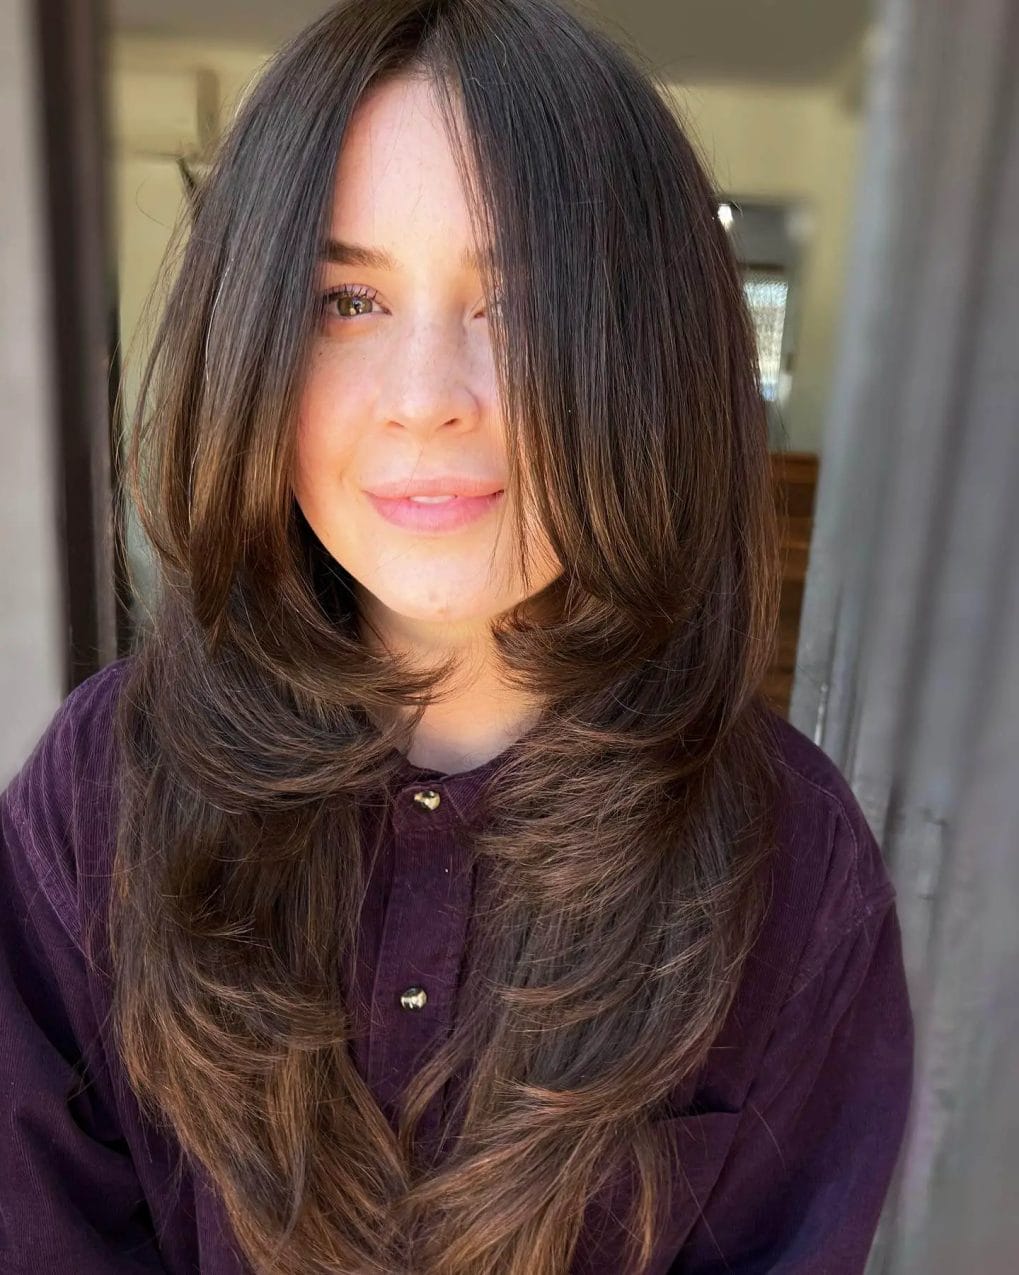 Brunette hair capturing the 90s essence with elegant layers.